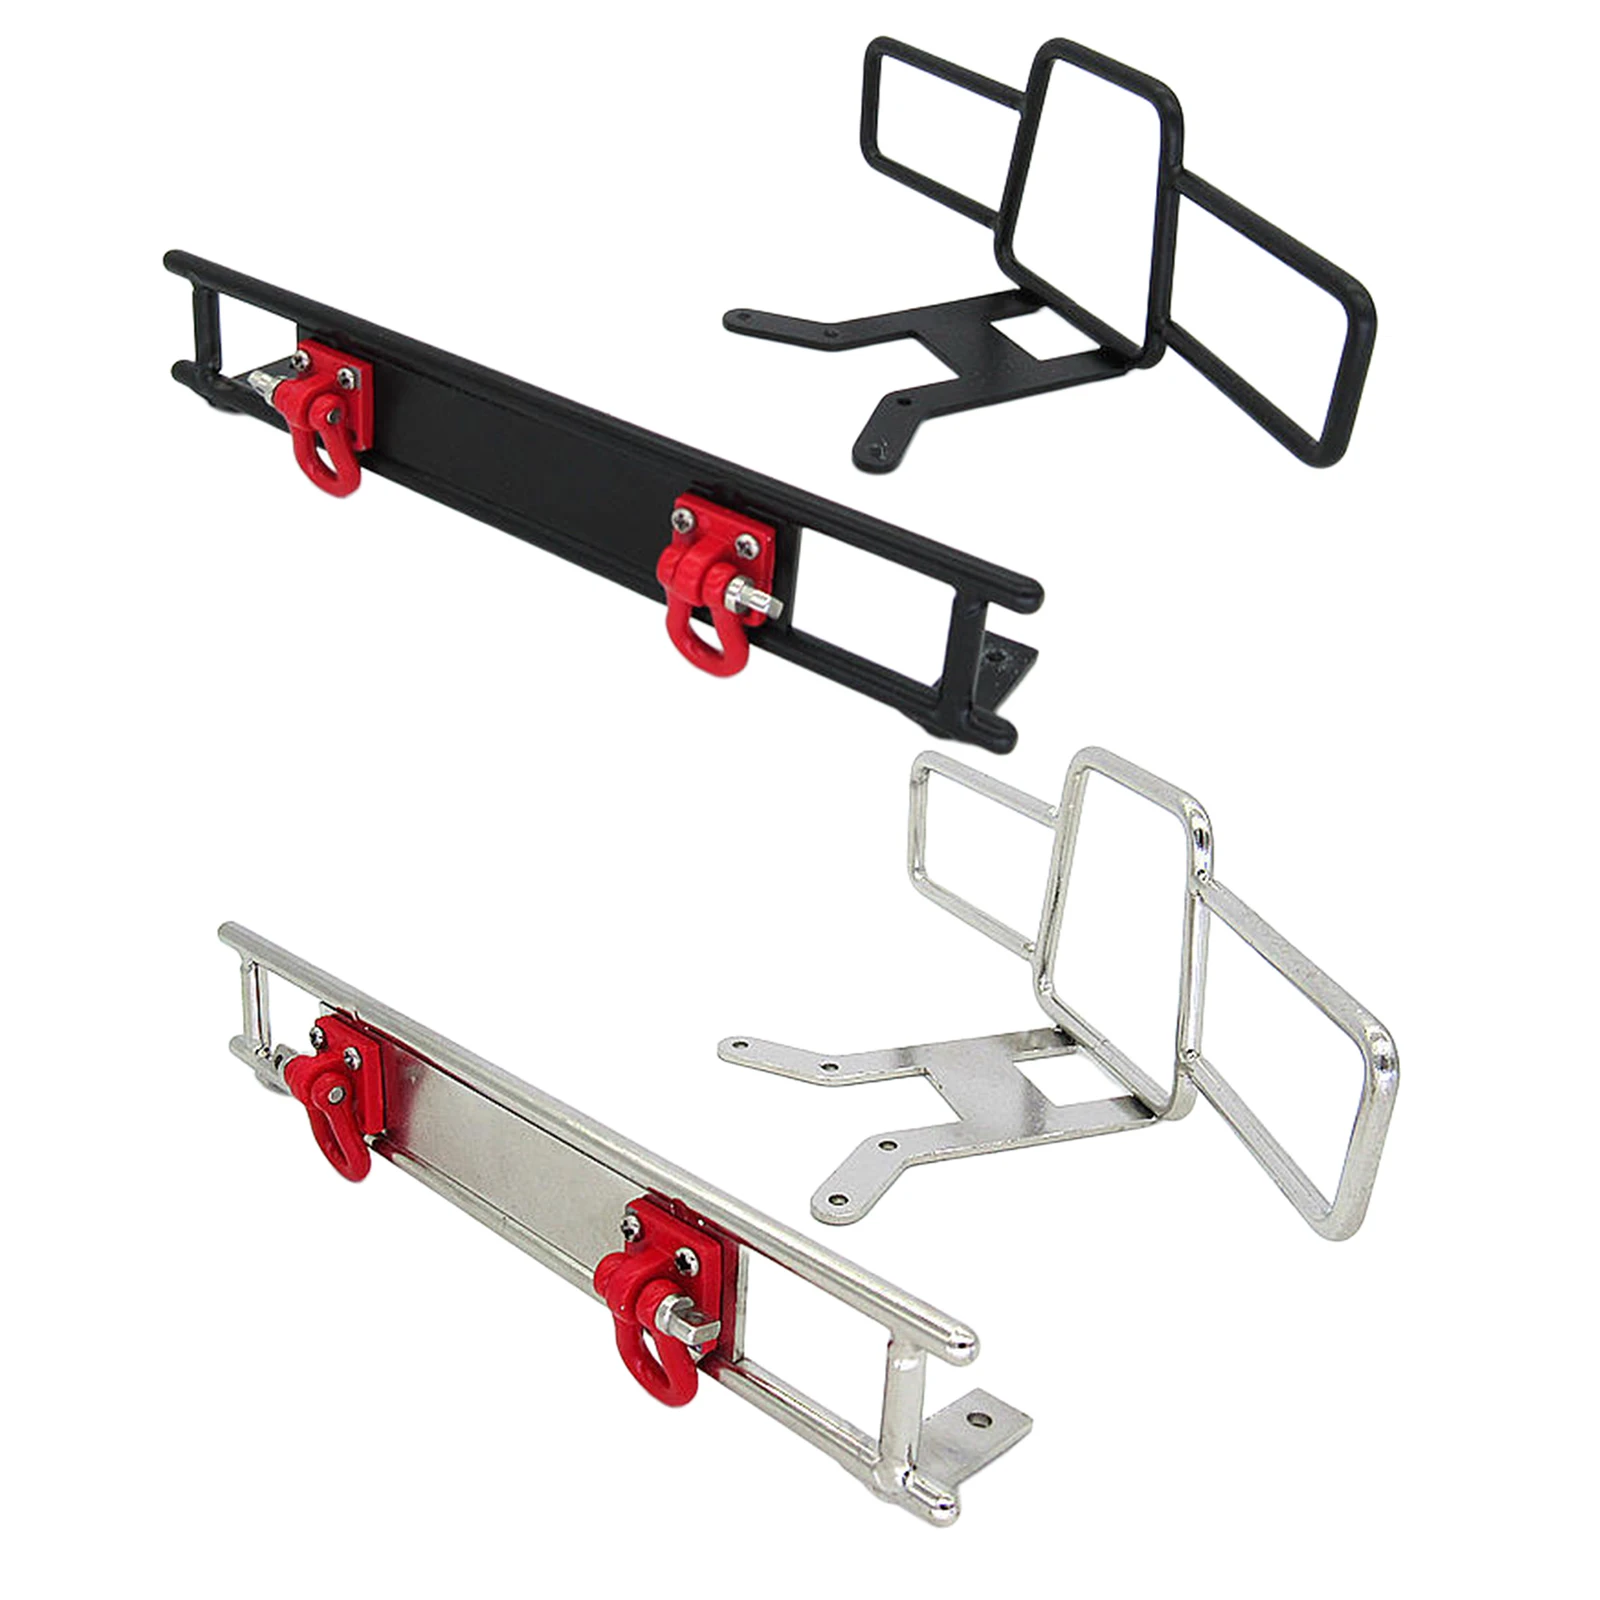 1/10 Scale Front Rear Bumper Set, Metal Bull Bar with Hook Hanger Mount Seat for